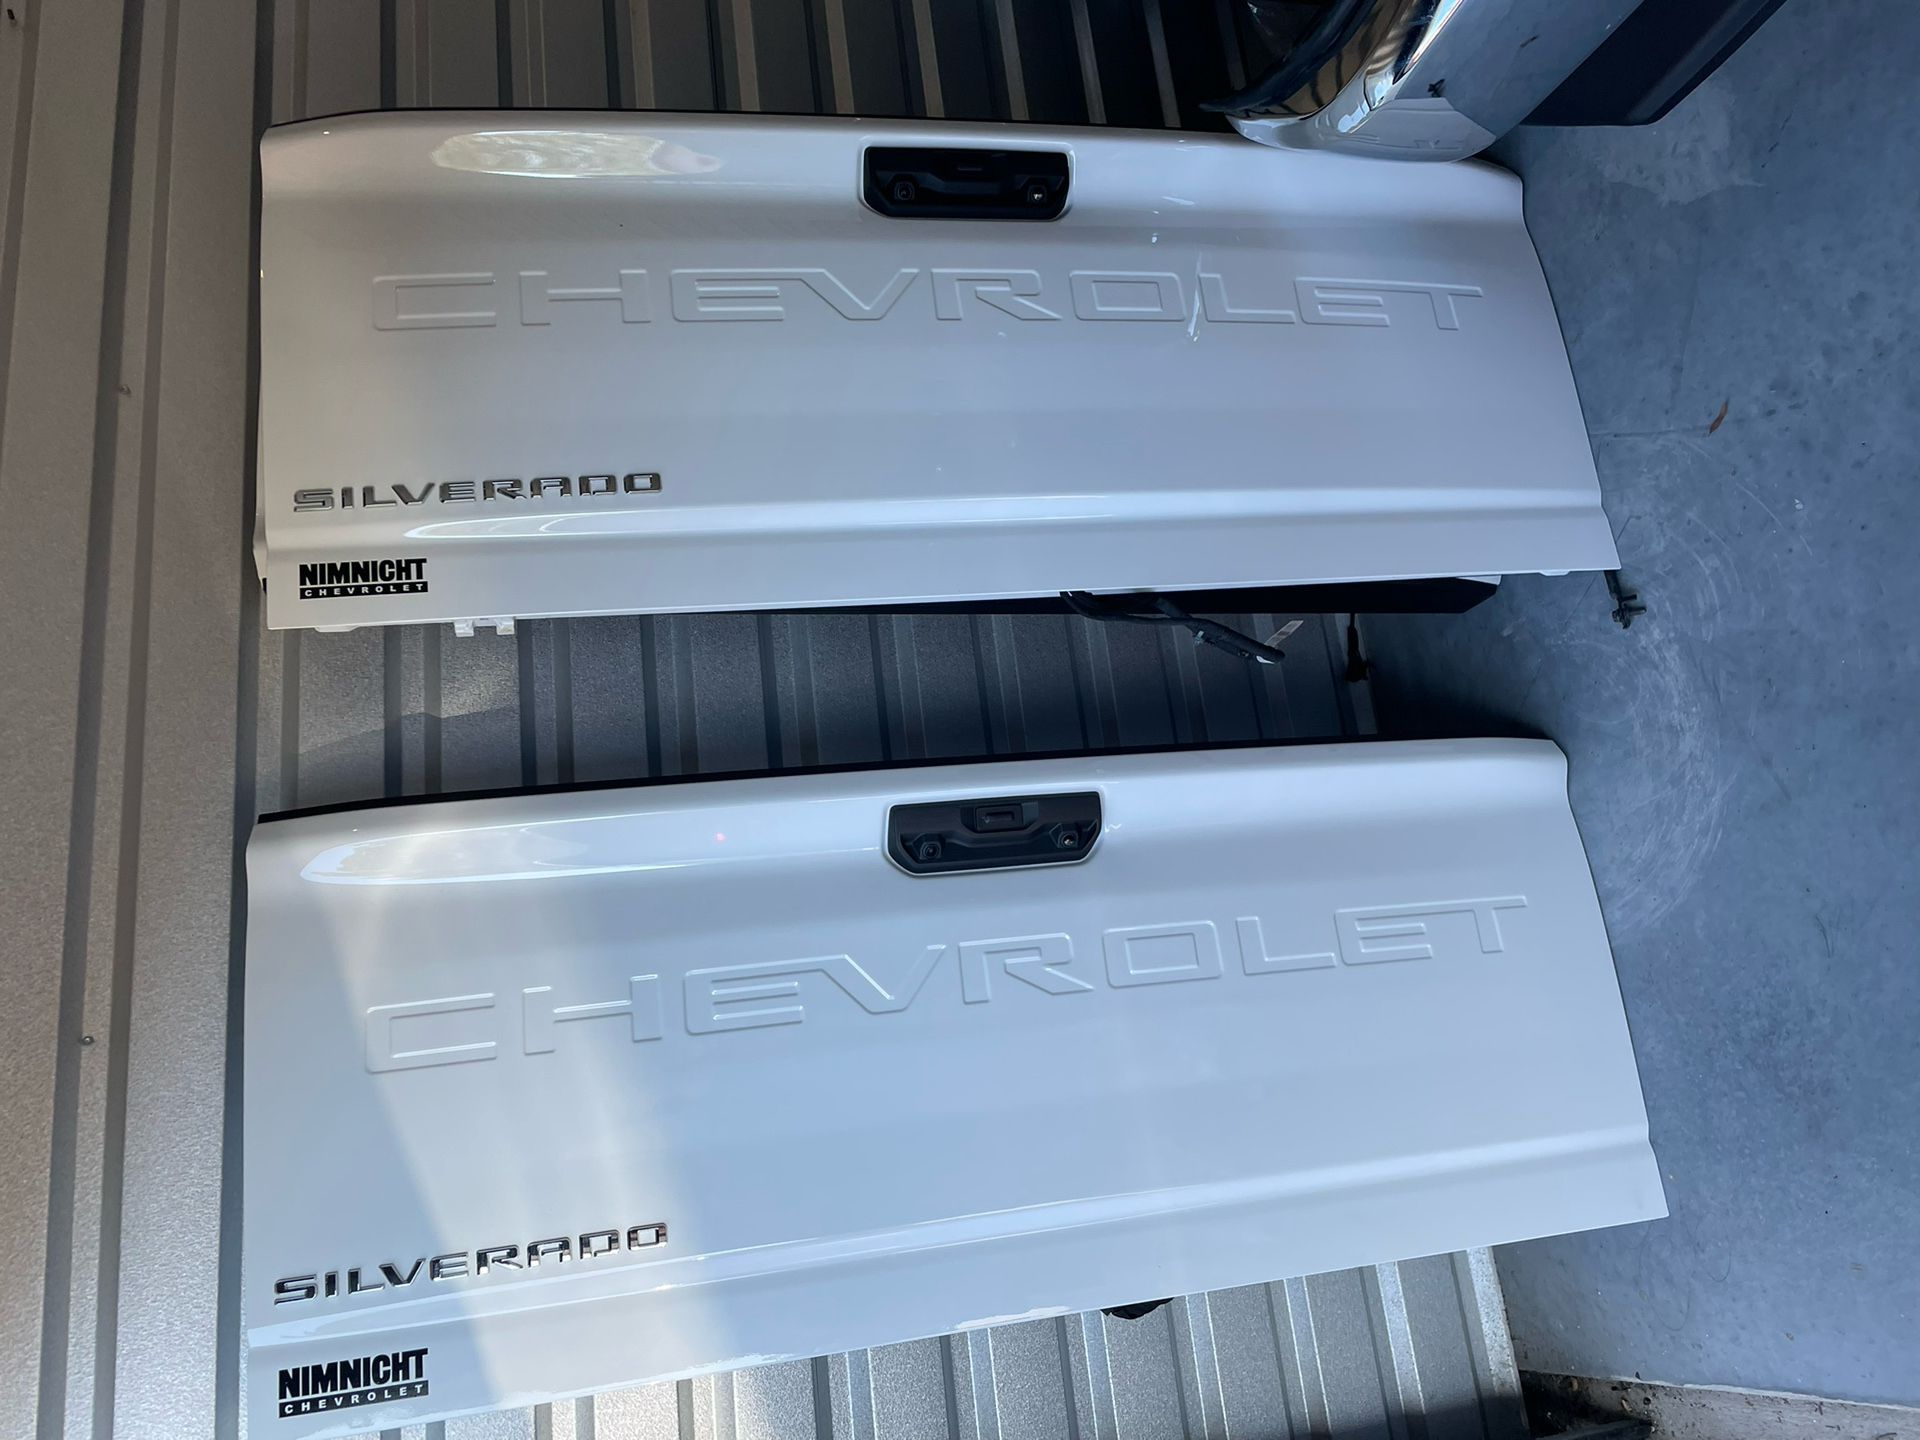 Silverado tailgate New take off with camera and electric lock